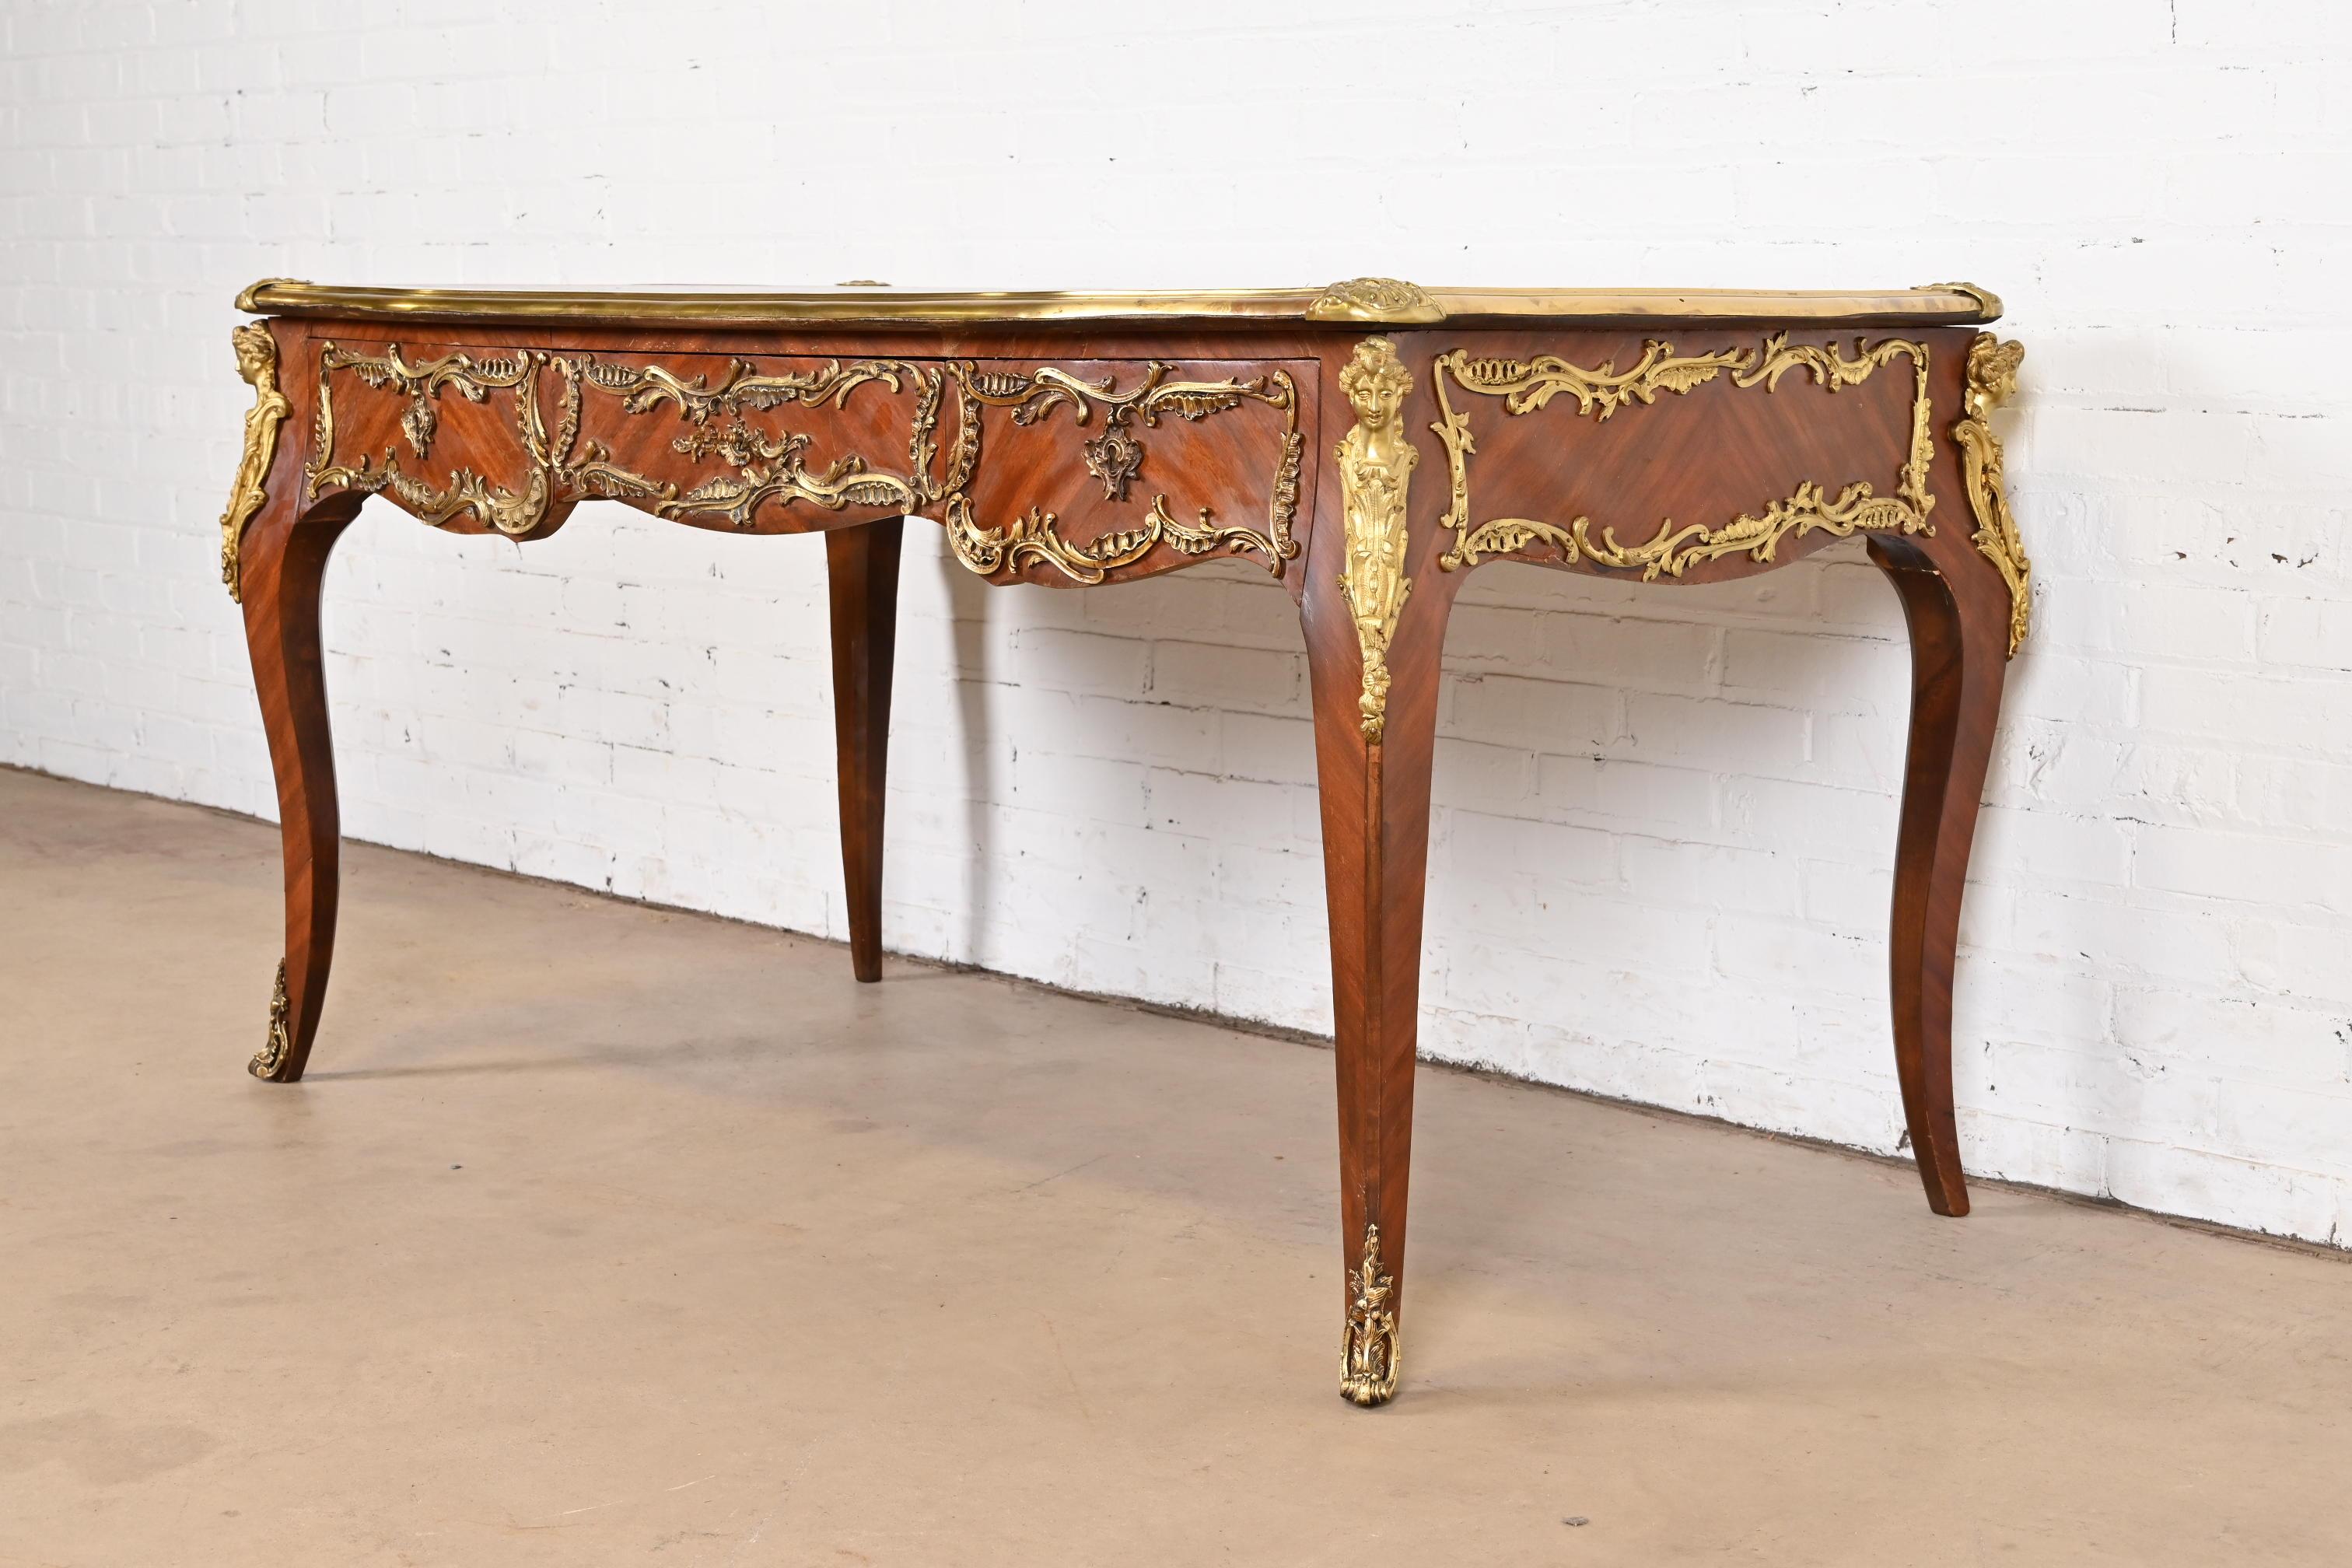 An outstanding French Louis XV style writing desk or bureau plat desk

By R. Soriano

Spain, 20th Century

Gorgeous kingwood, with ornate gilt bronze ormolu mounts, and embossed black leather top.

Measures: 59